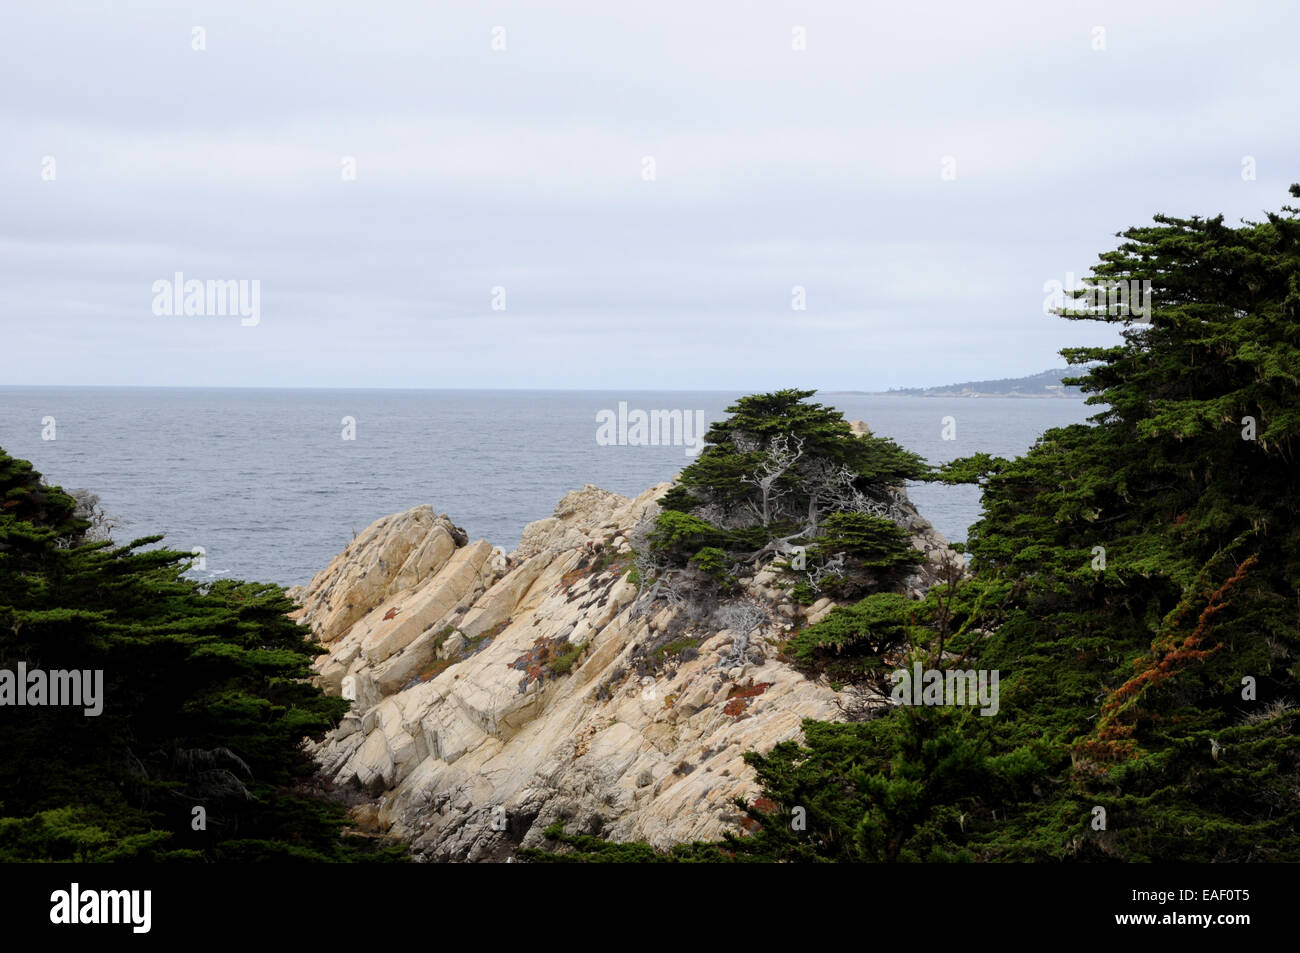 A Monterey Cypress, surrounded by a protective and supportive wall, an attraction on the '17 Mile Drive' private toll road. Stock Photo